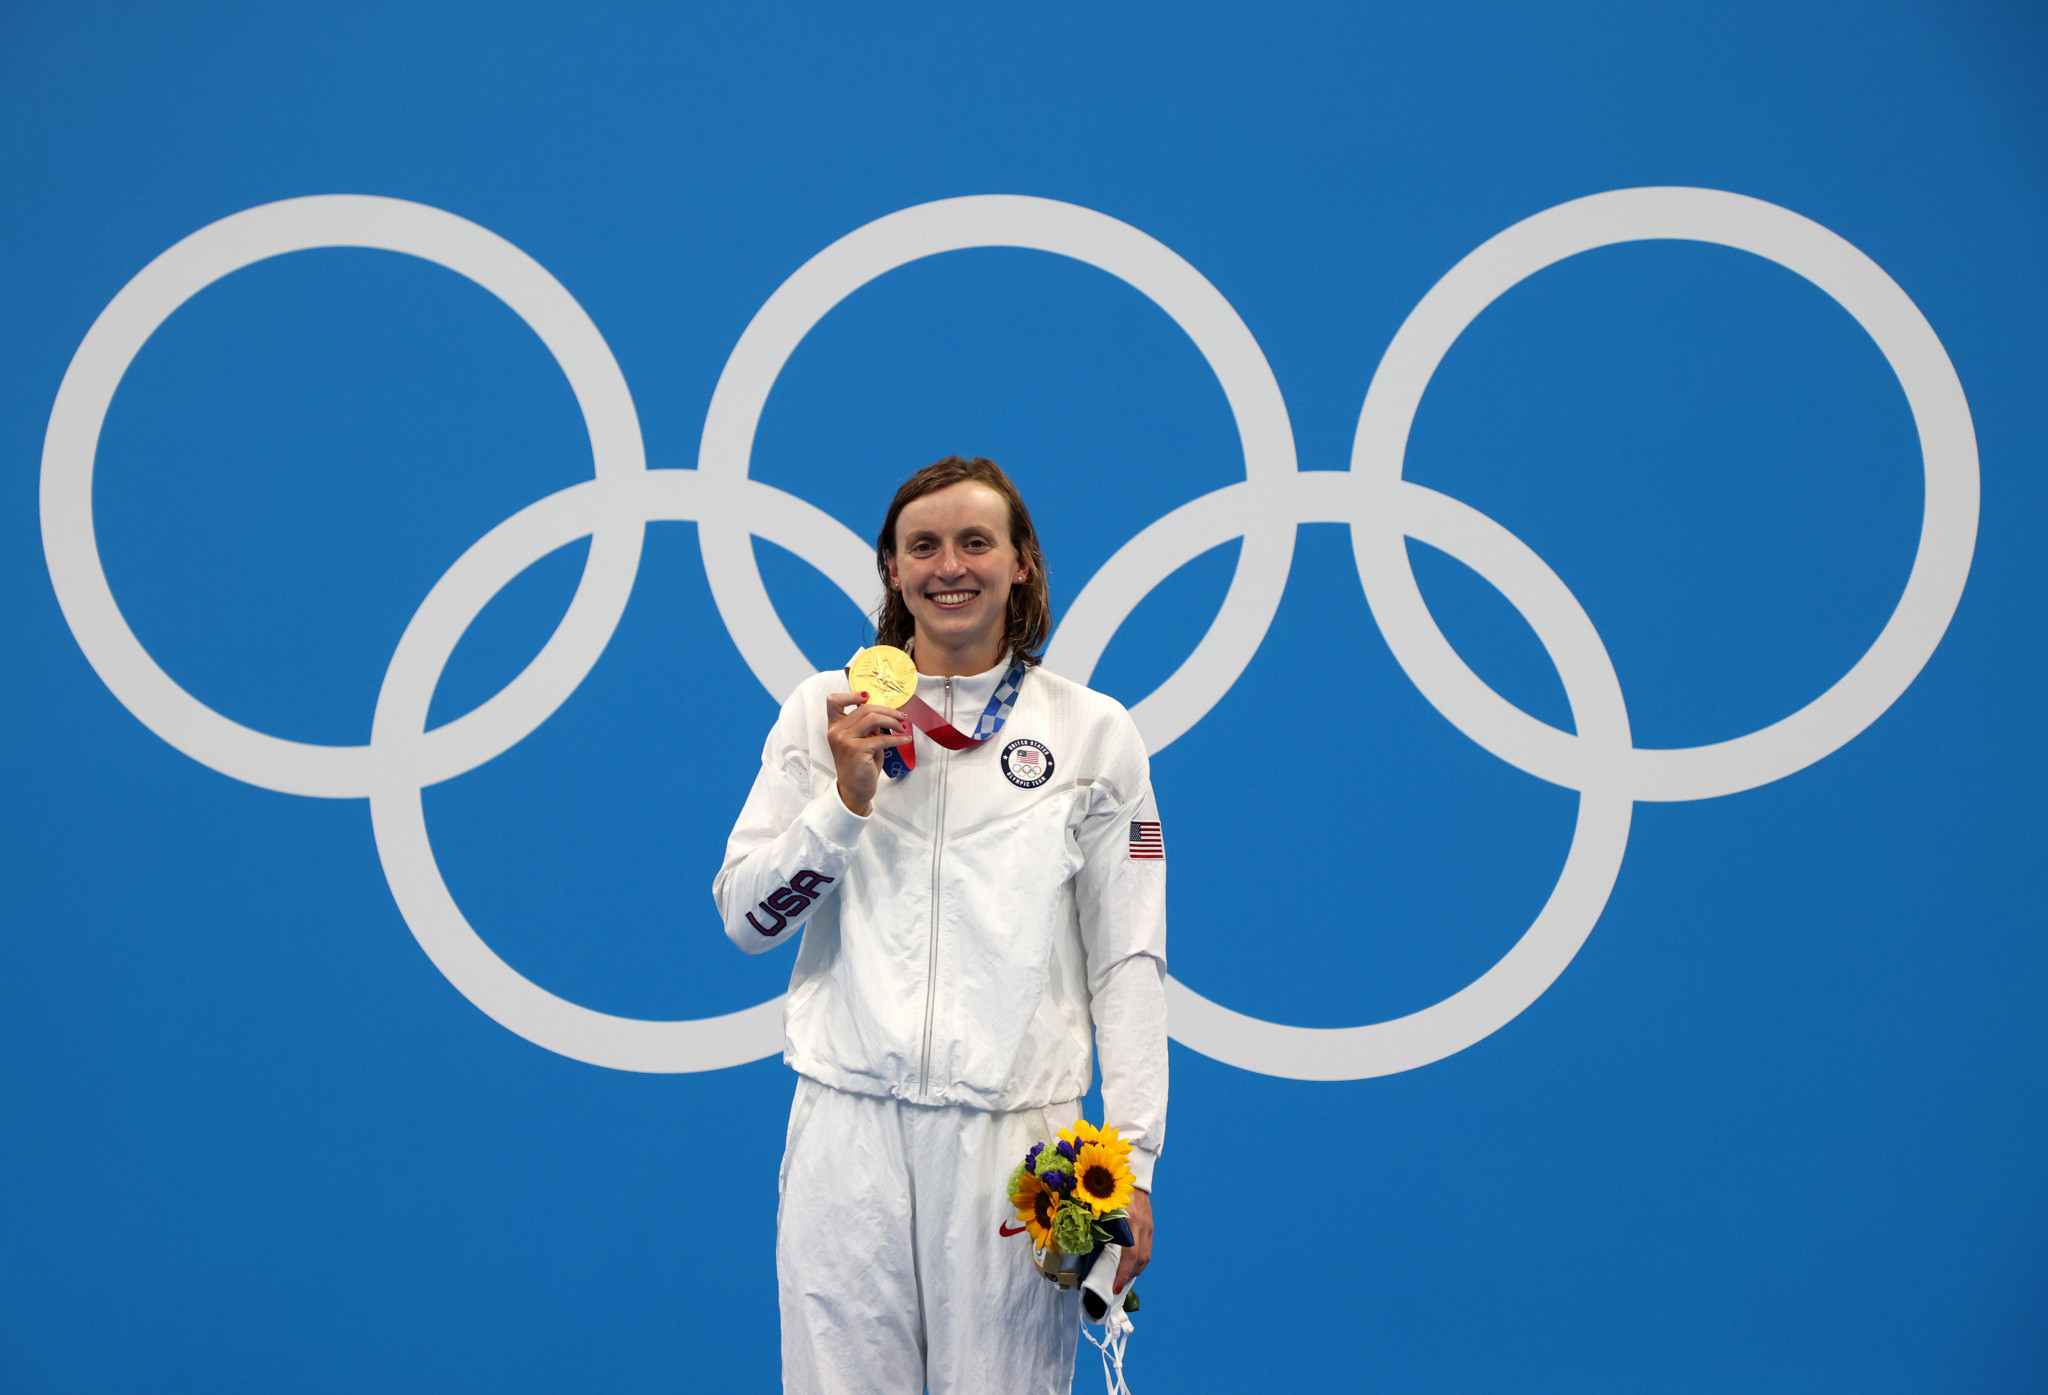 Katie Ledecky won the women's 1500m freestyle gold medal at the Tokyo 2020 Olympics ©Getty Images